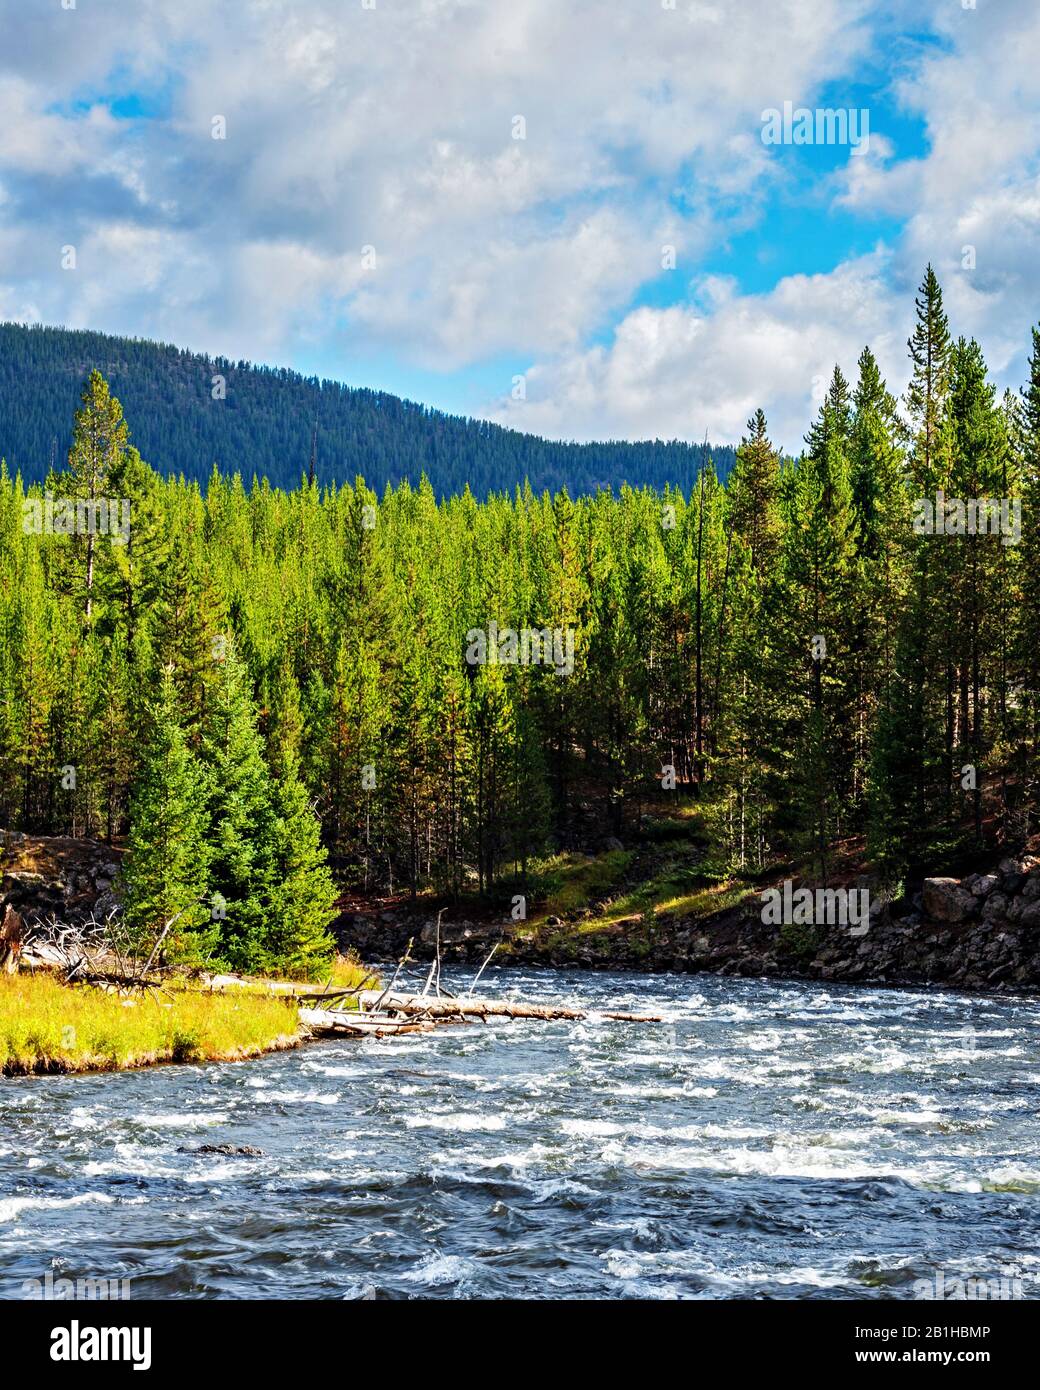 The refreshing great outdoors in nature's backcountry. Stock Photo